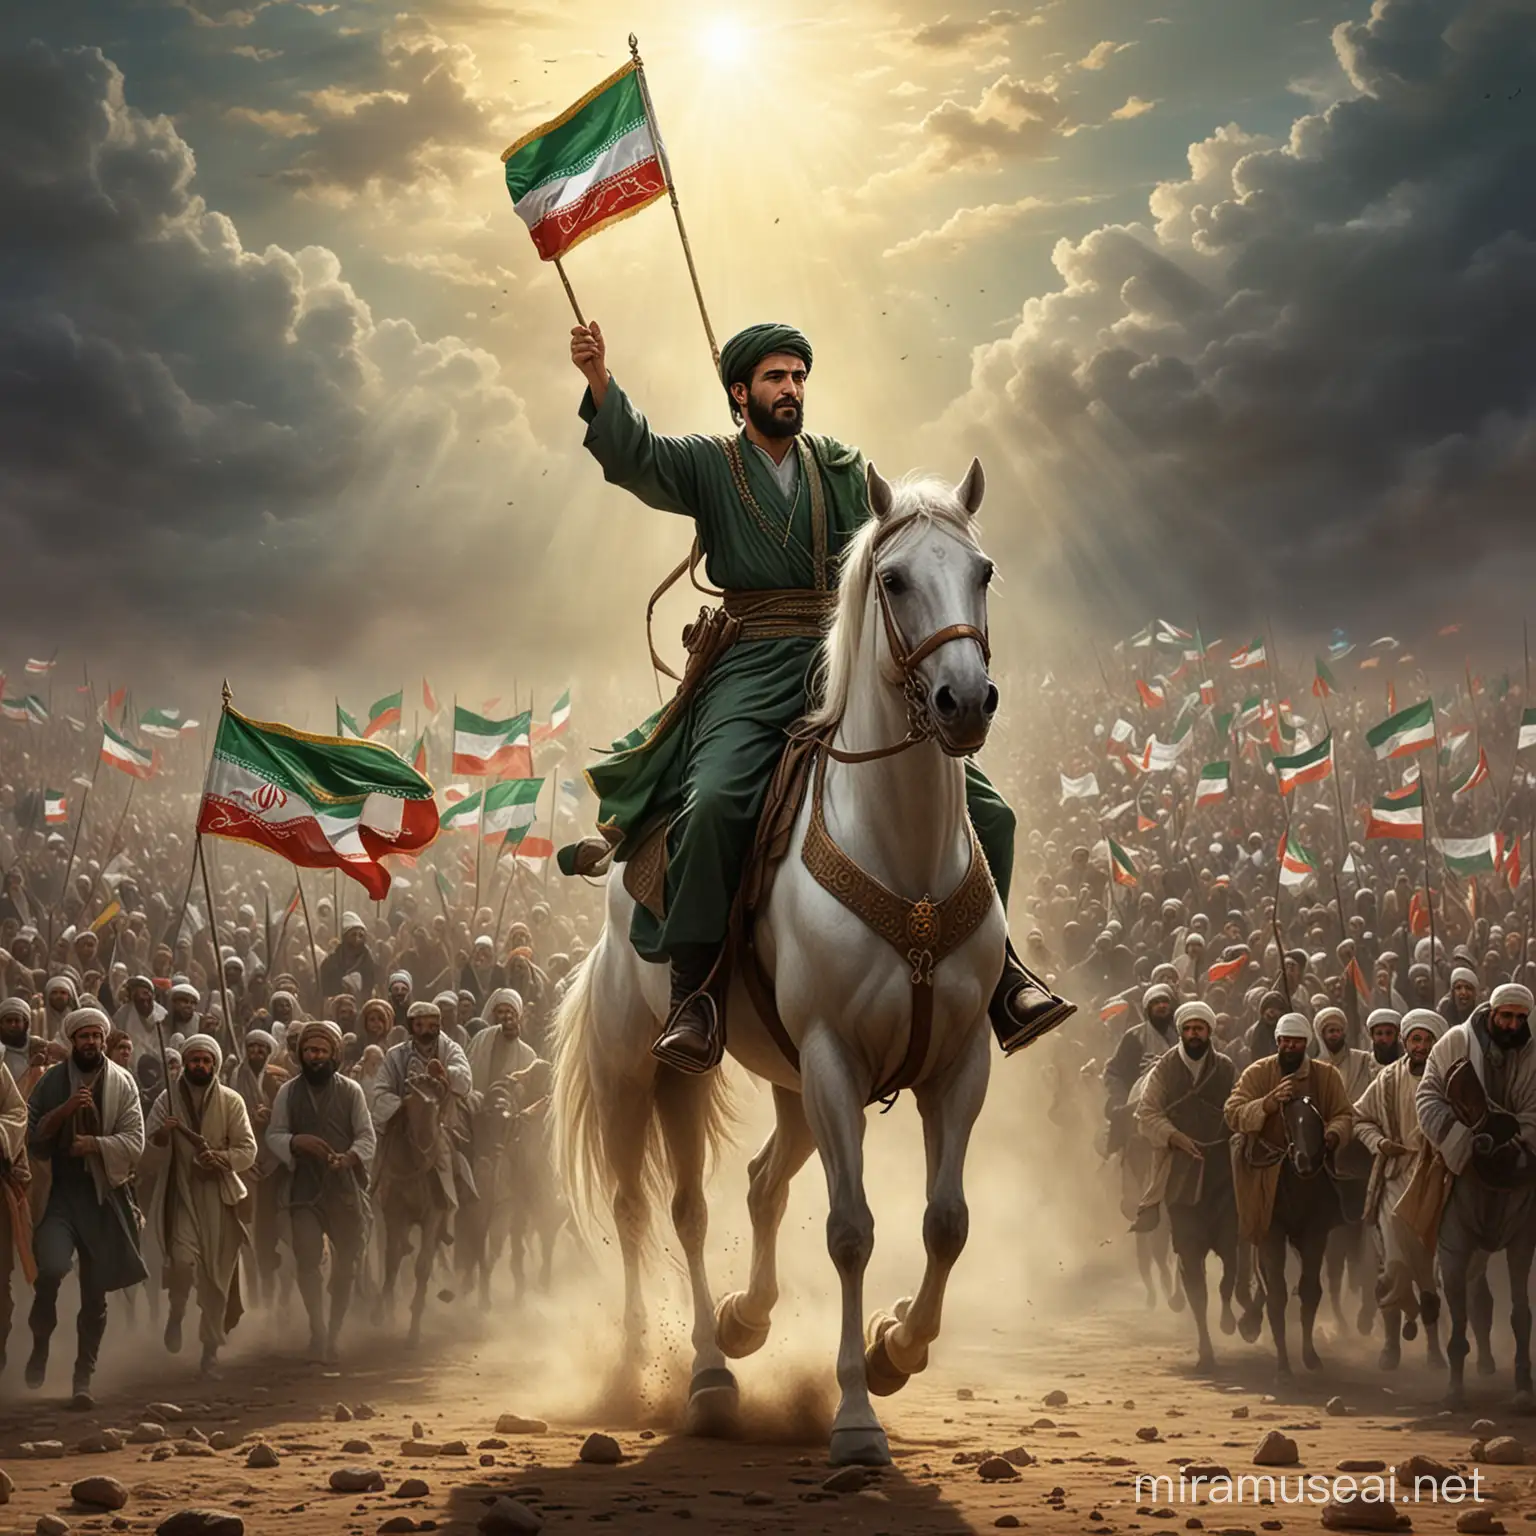 Artistic Representation of Imam Mahdi and Revolutionary Struggle for Justice and Freedom